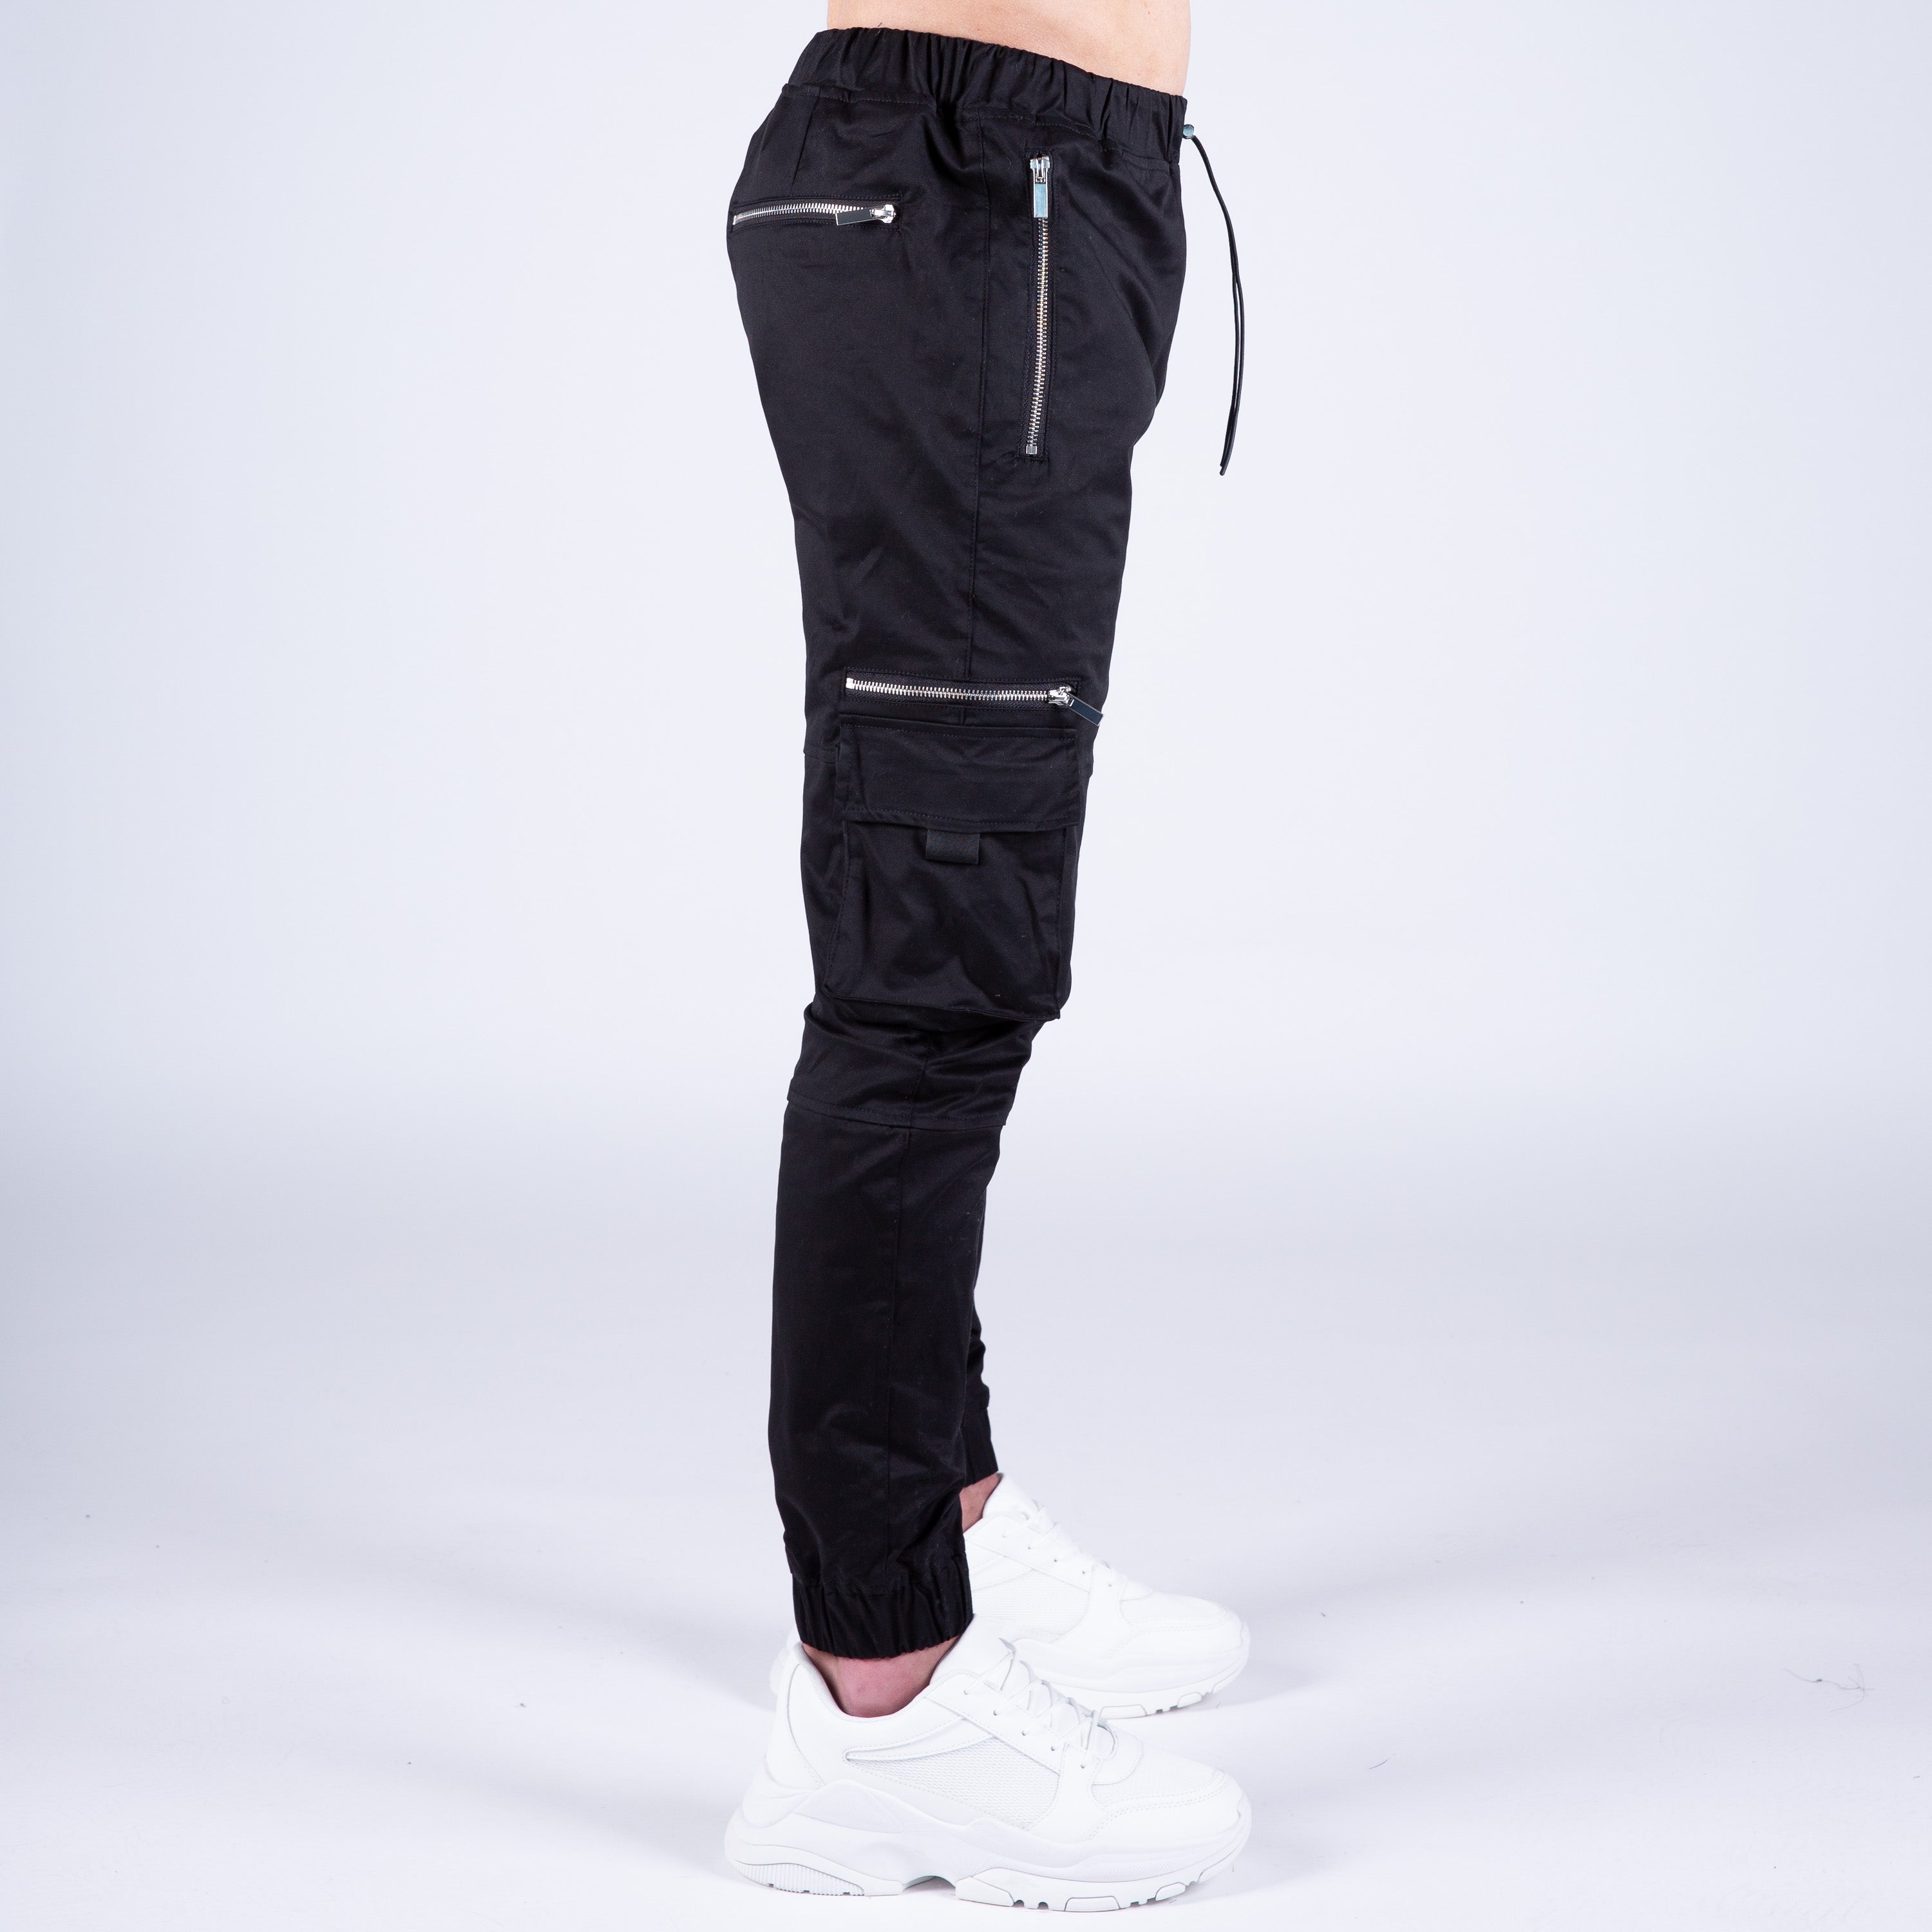 ankle zip trousers